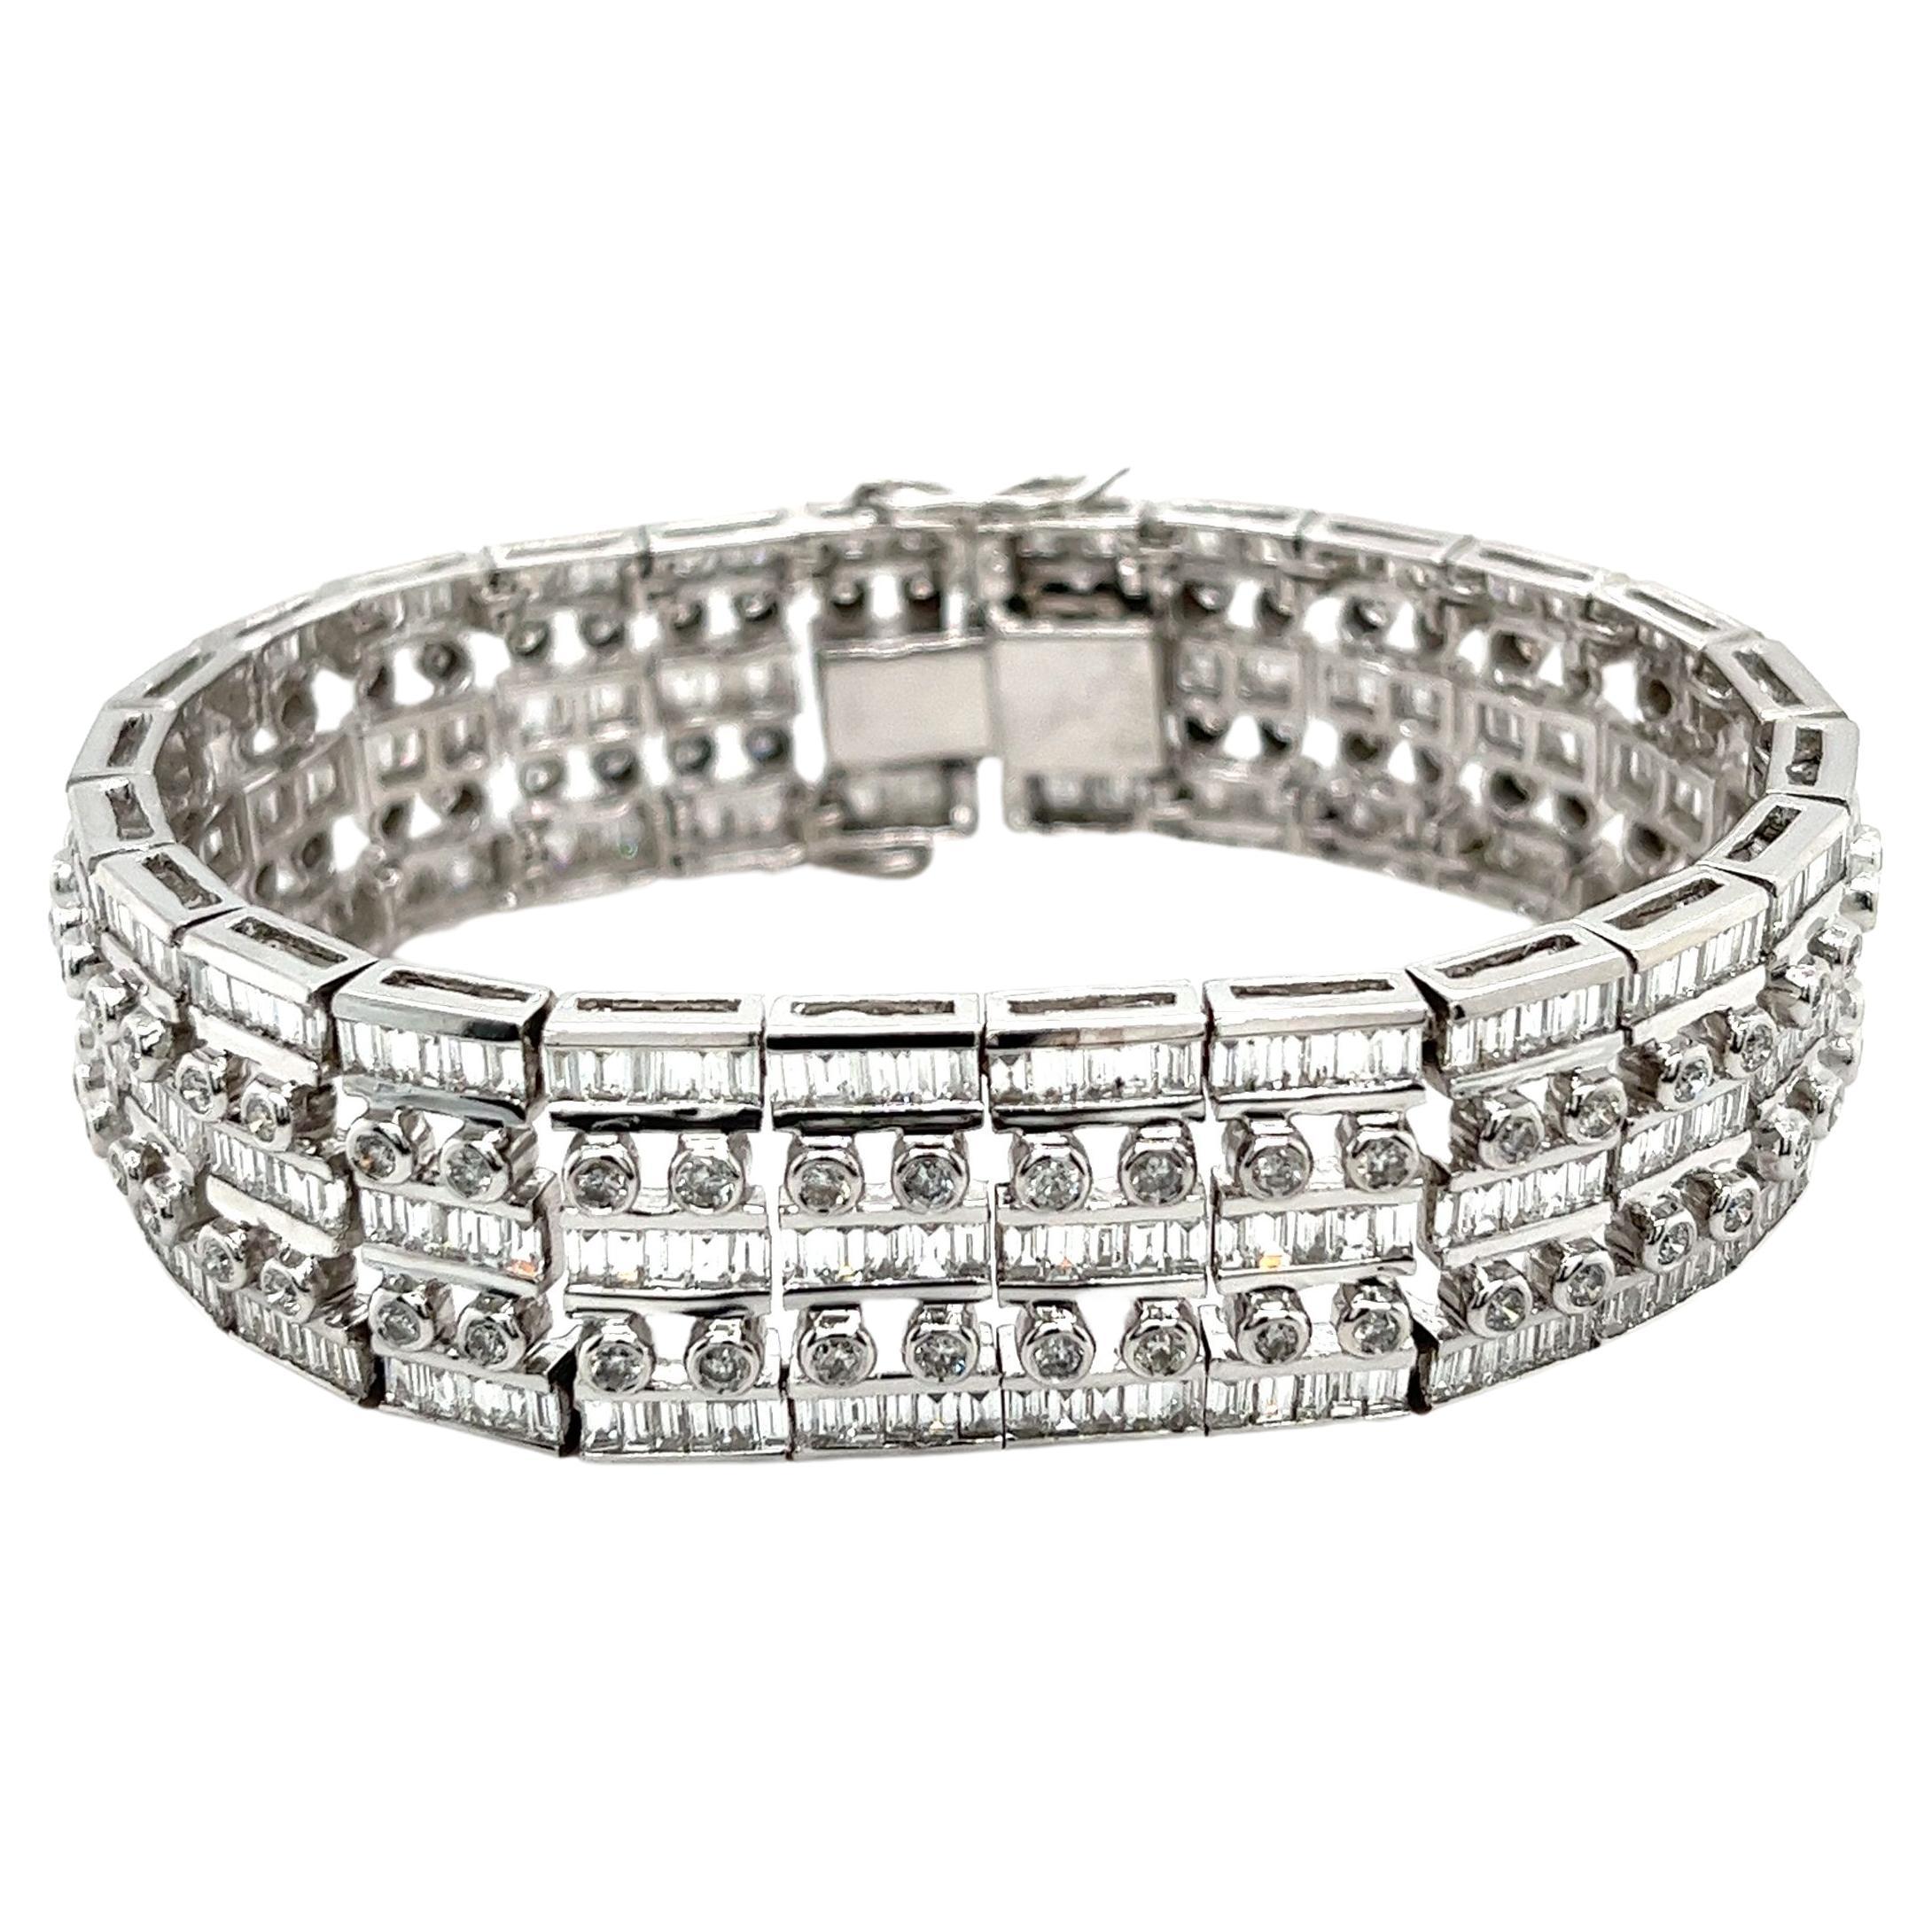 Experience the pinnacle of luxury with our 17.2 carat natural diamond link bracelet. Crafted from 18k white gold, it features 375 baguette and 100 round cut diamonds arranged in a five-row design. Unisex and weighing 68 grams with a width of 17.6mm,